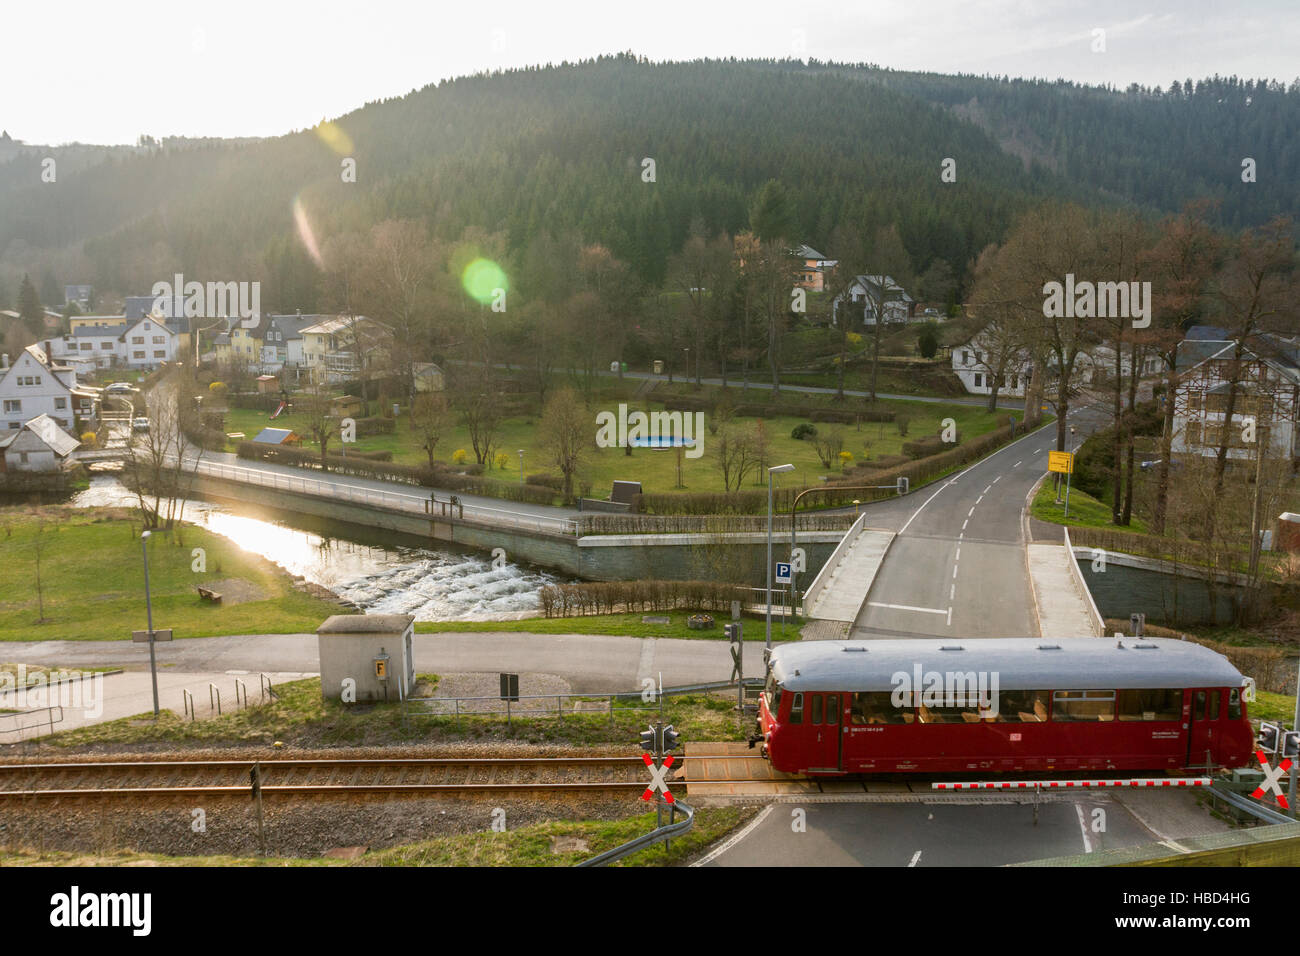 Old Railbus in Thuringia (Germany) Stock Photo